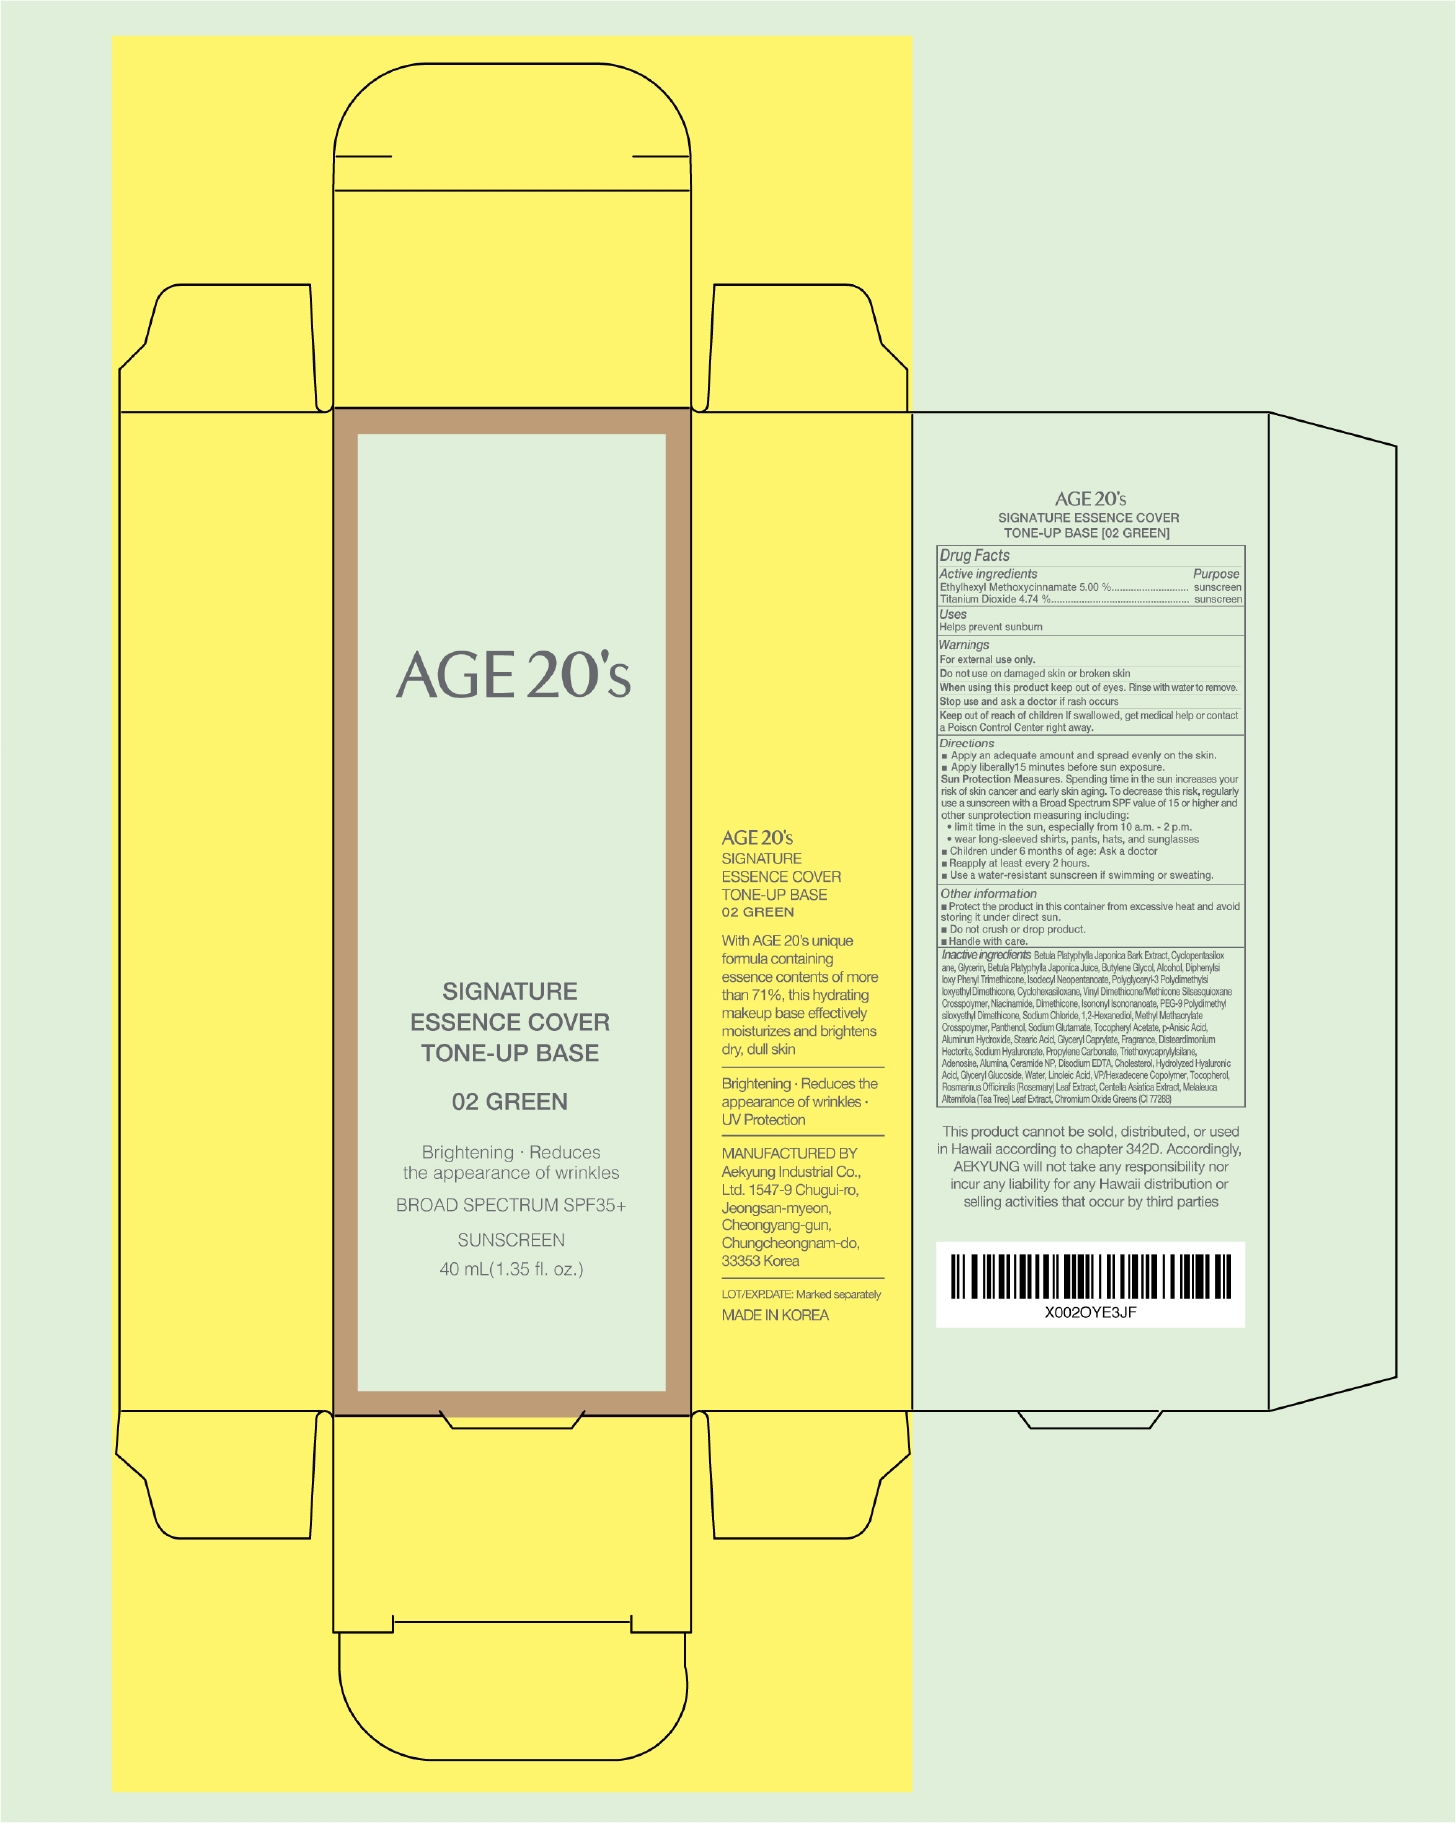 AGE20s SIGNATURE ESSENCE COVER TONE-UP BASE 02 GREEN